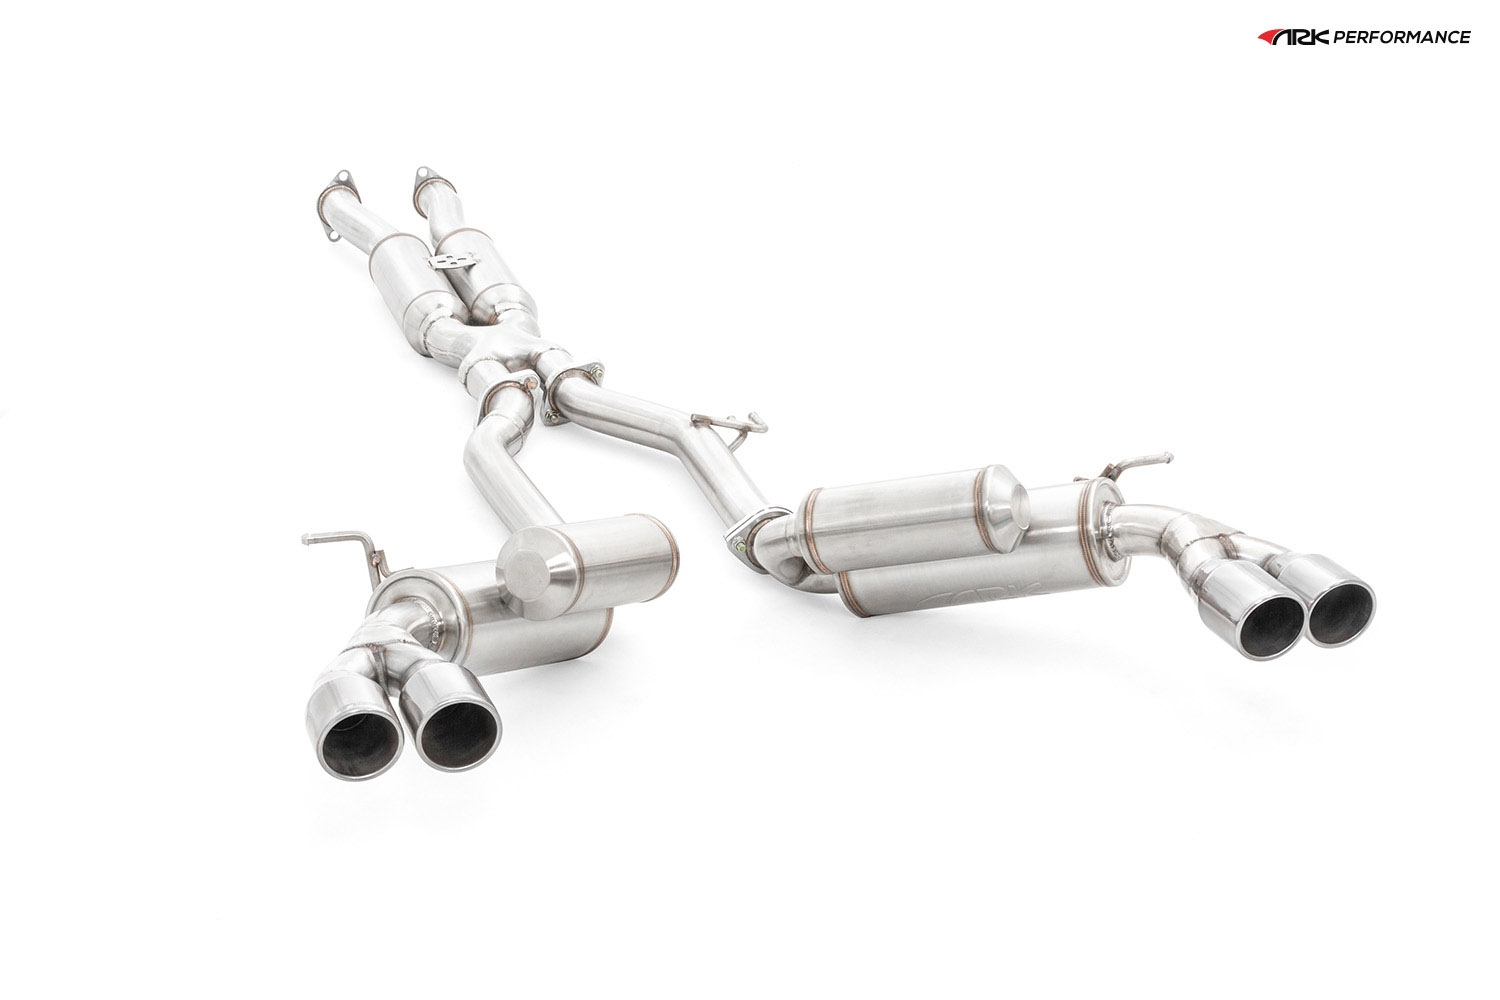 Ark Performance Stainless Steel GRiP Cat-Back Exhaust System 2.5in Pipe w/ 3.5 Polished Quad Tip , Dual Exit - Hyundai Genesis Coupe 10-16 3.8L BK1, BK2